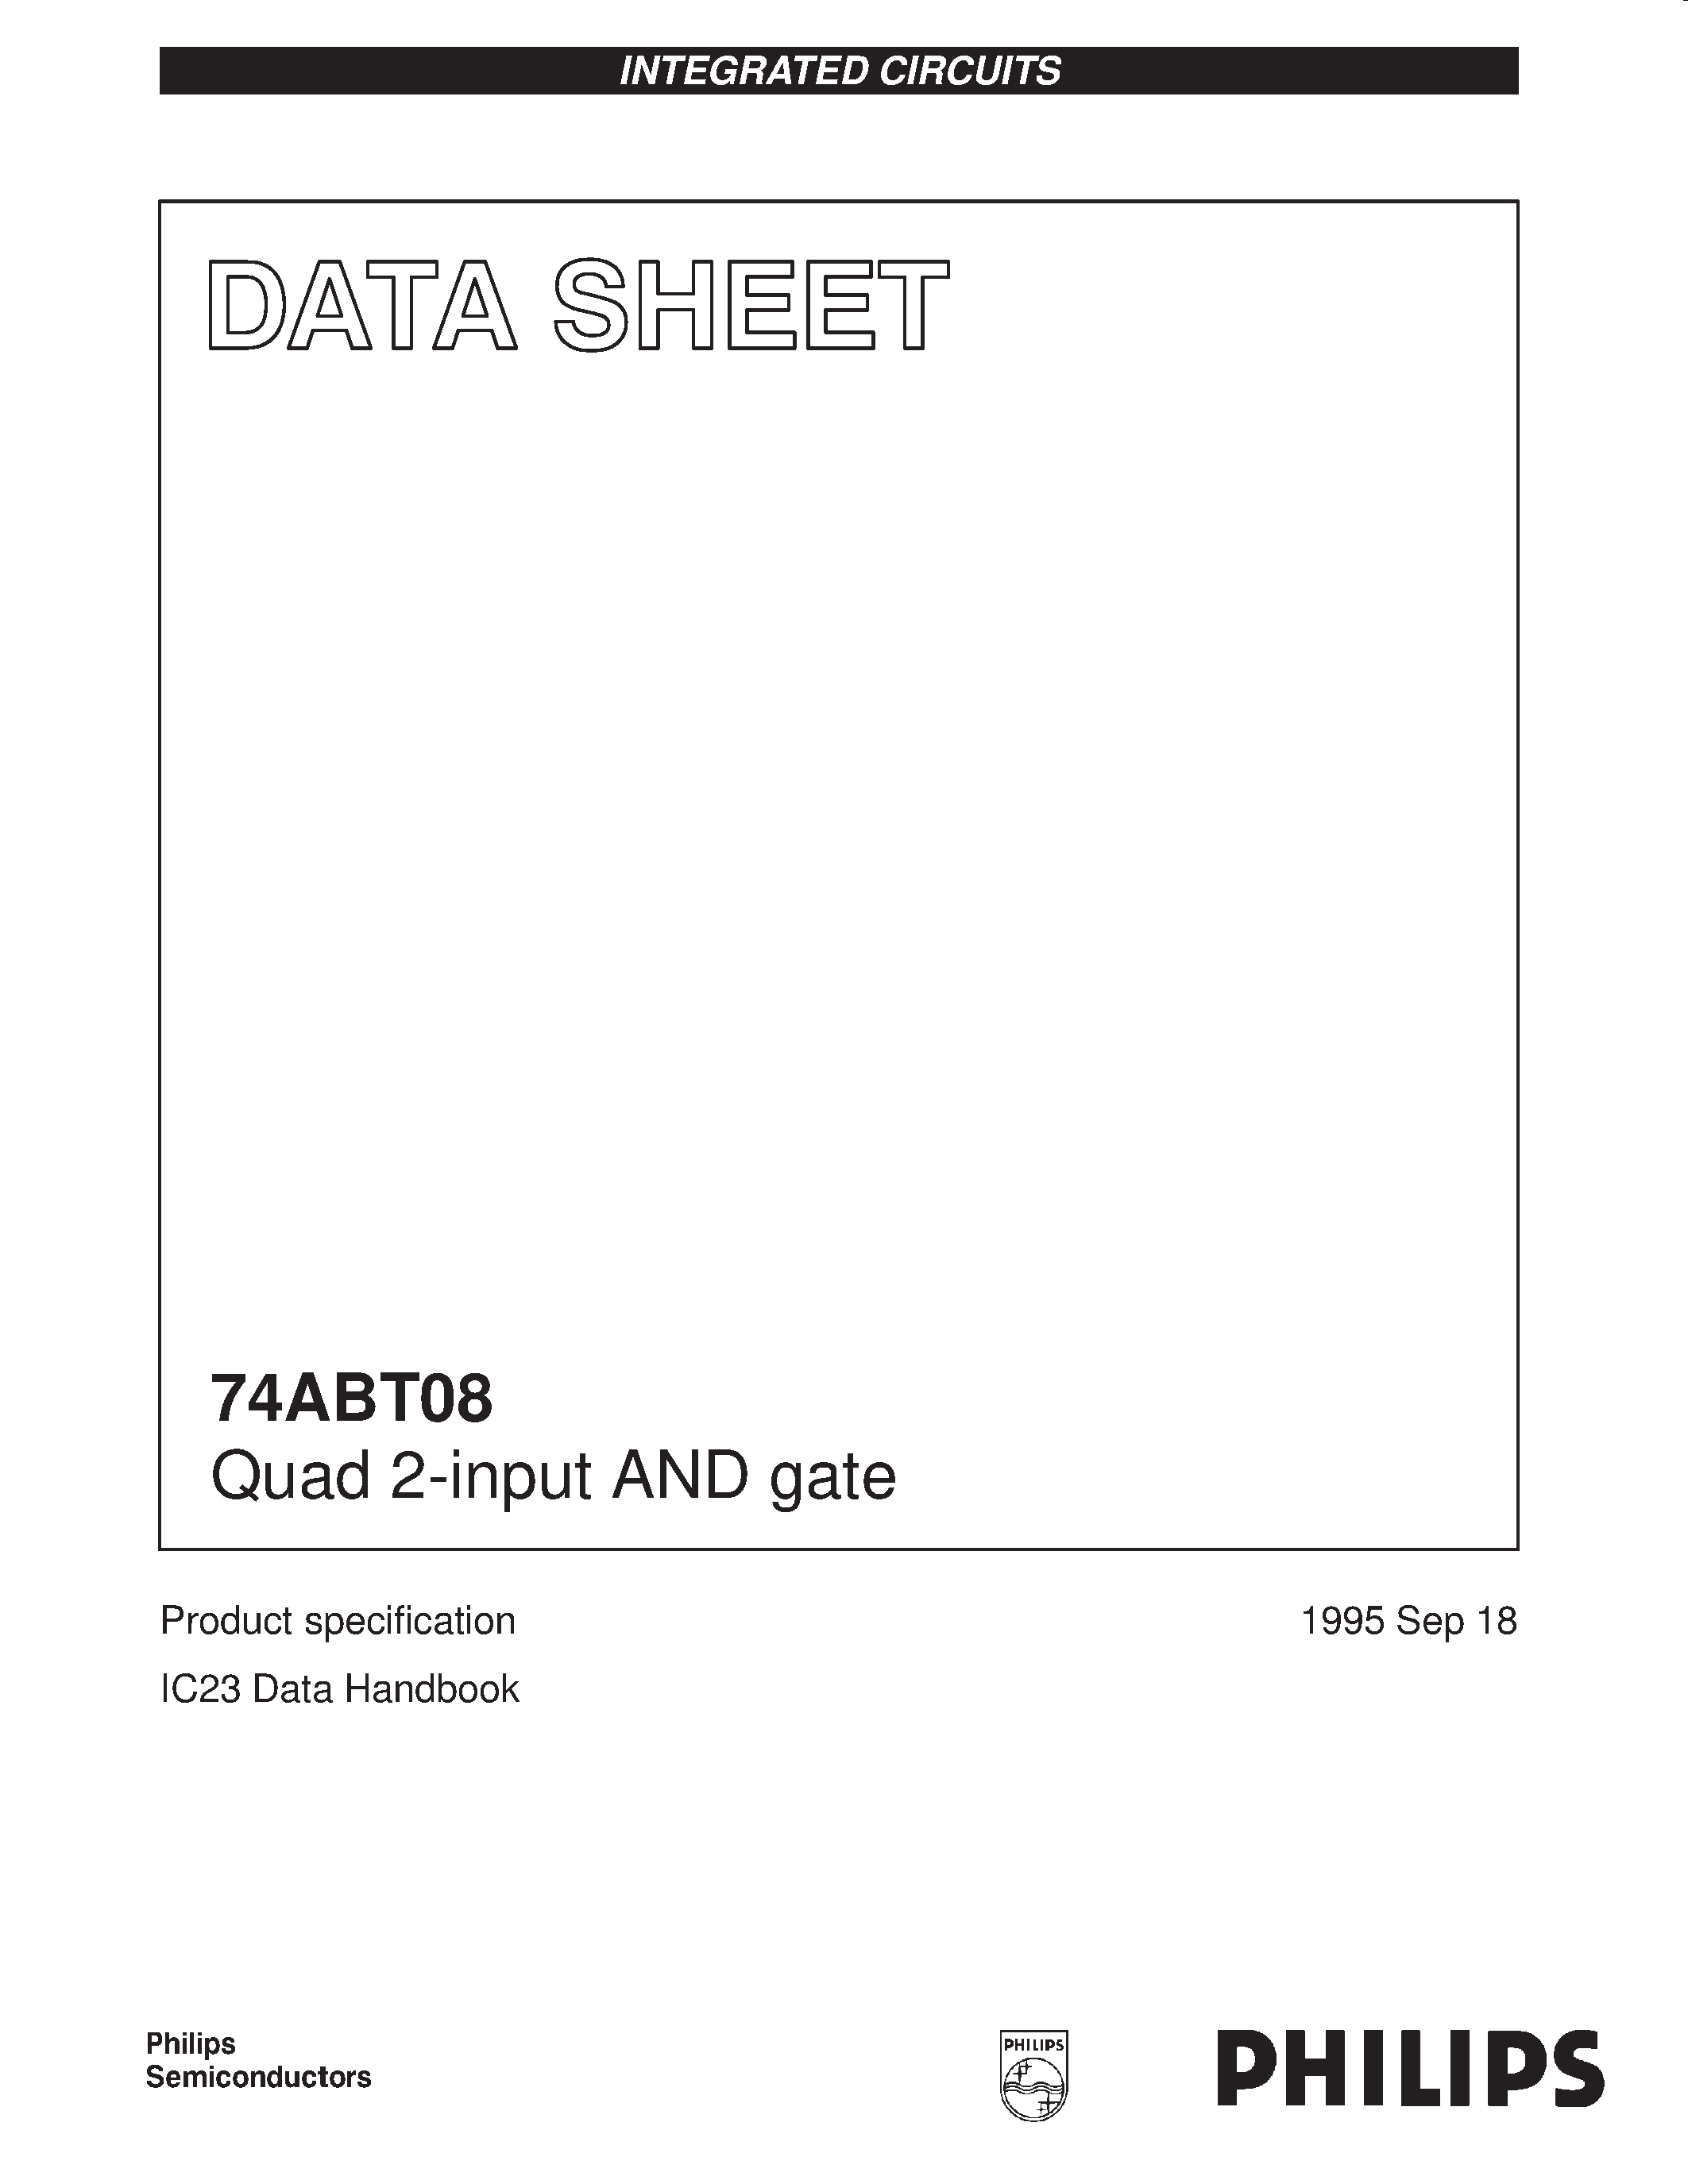 Datasheet 74ABT08 - Quad 2-input AND gate page 1